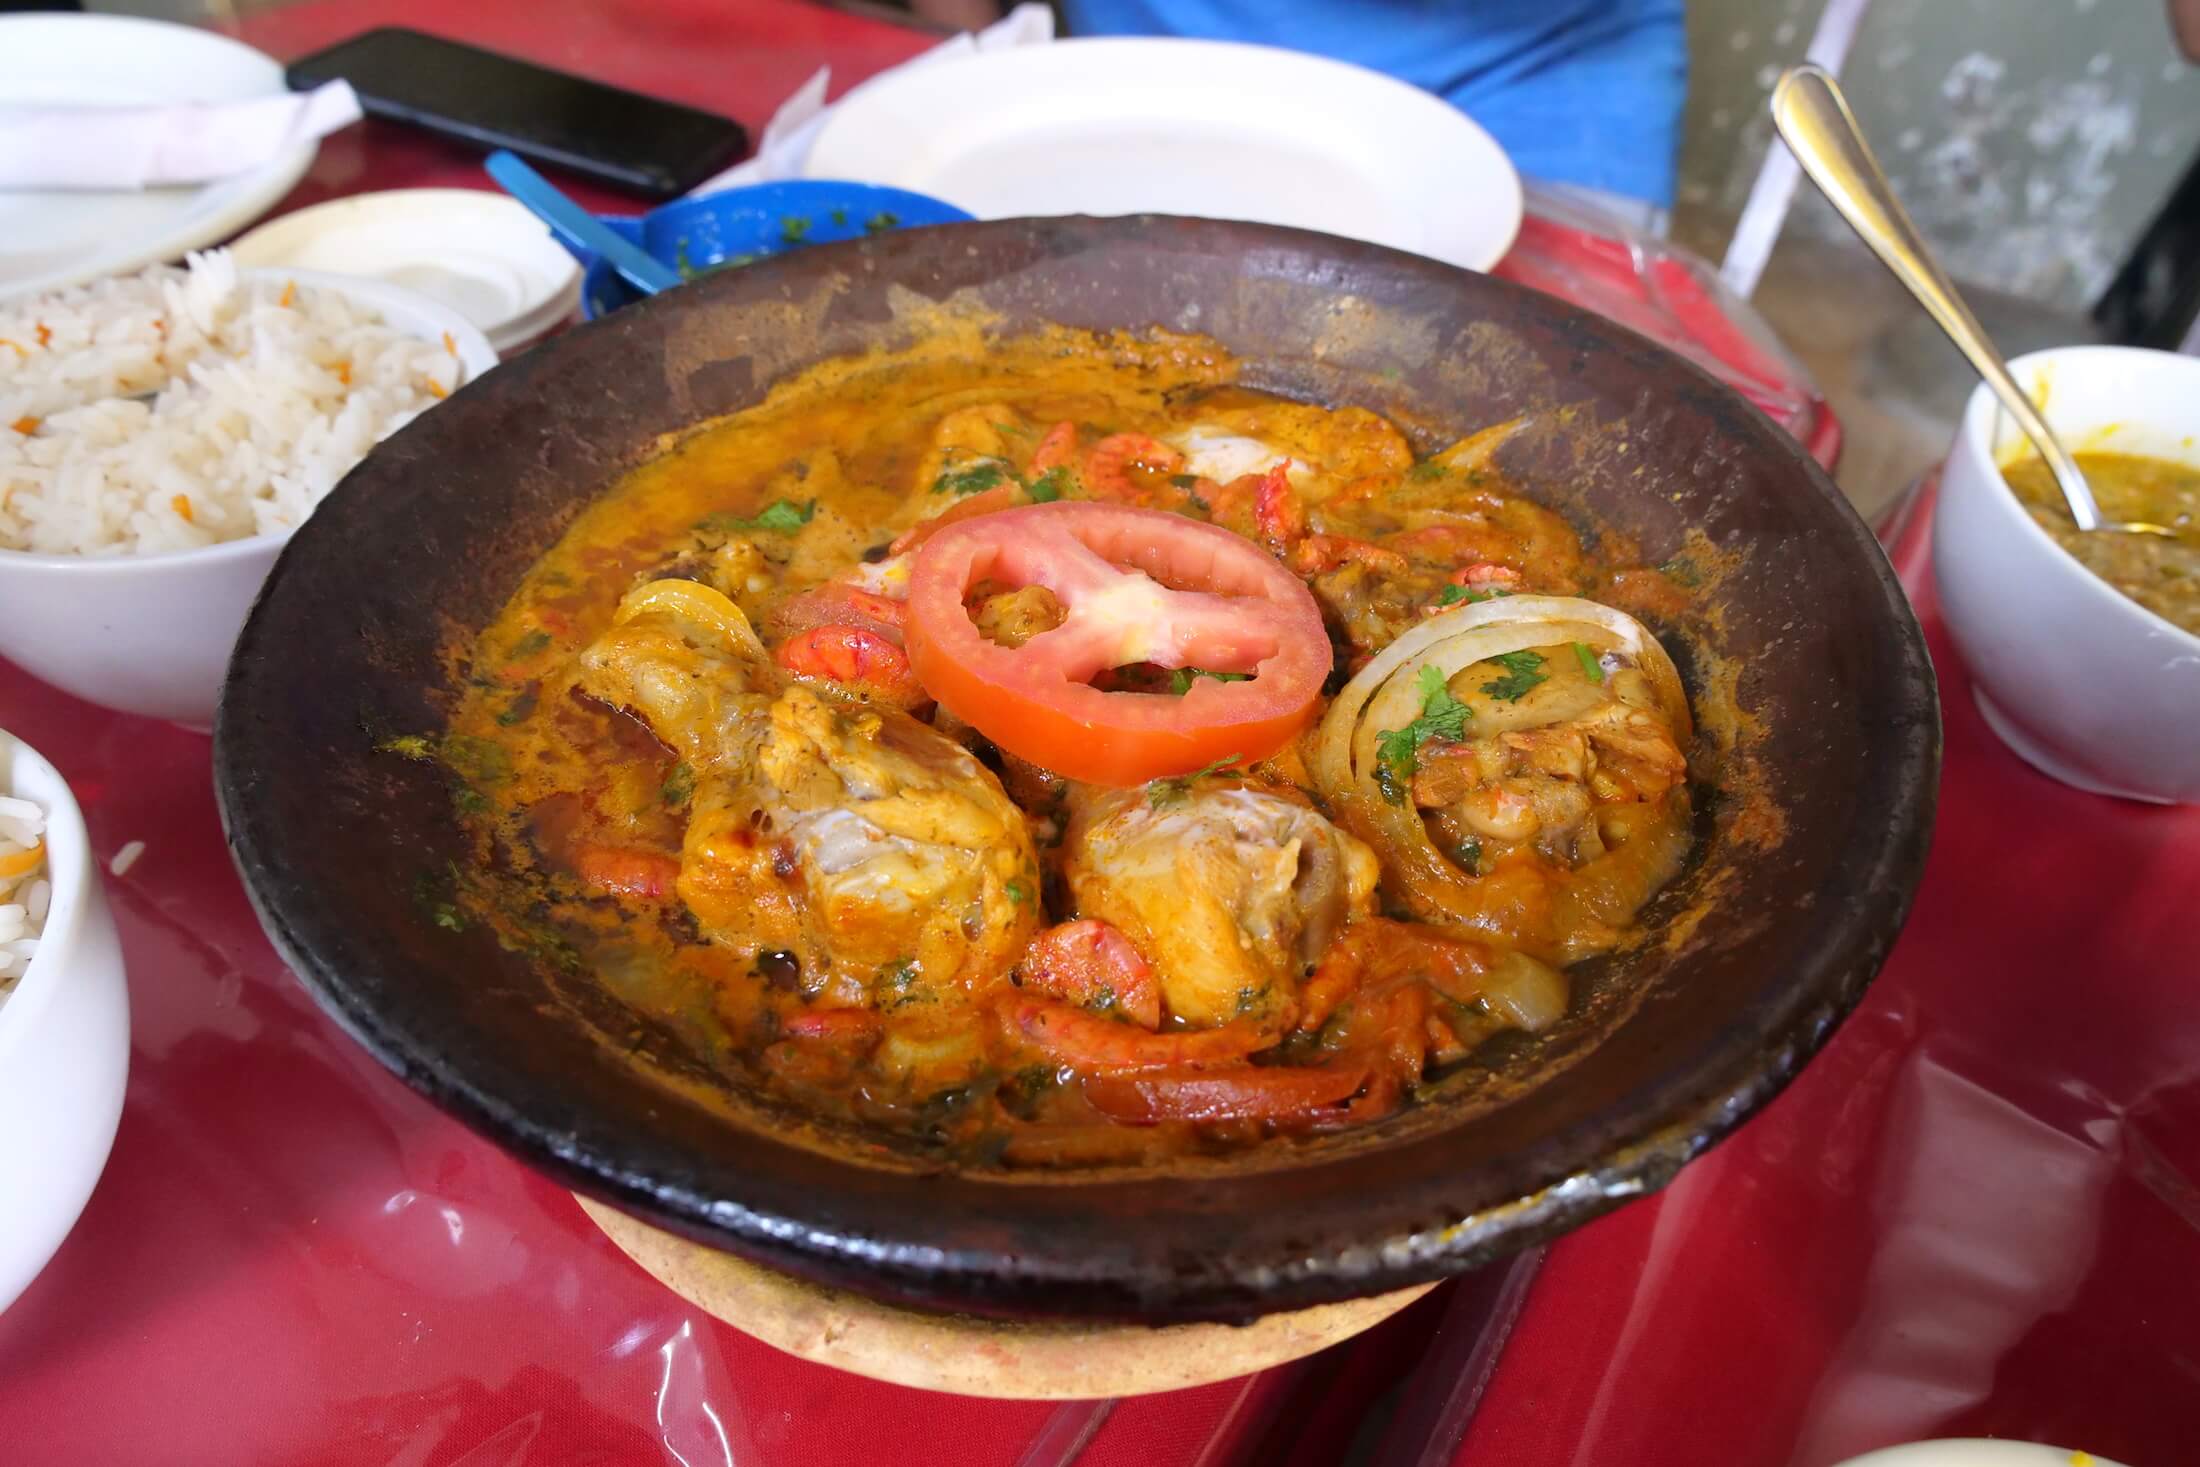 Salvador has amazing food, like this Gallina, Xinxim de Gallina, which will will usually be a mature chicken, with flavor suited for soup or stew